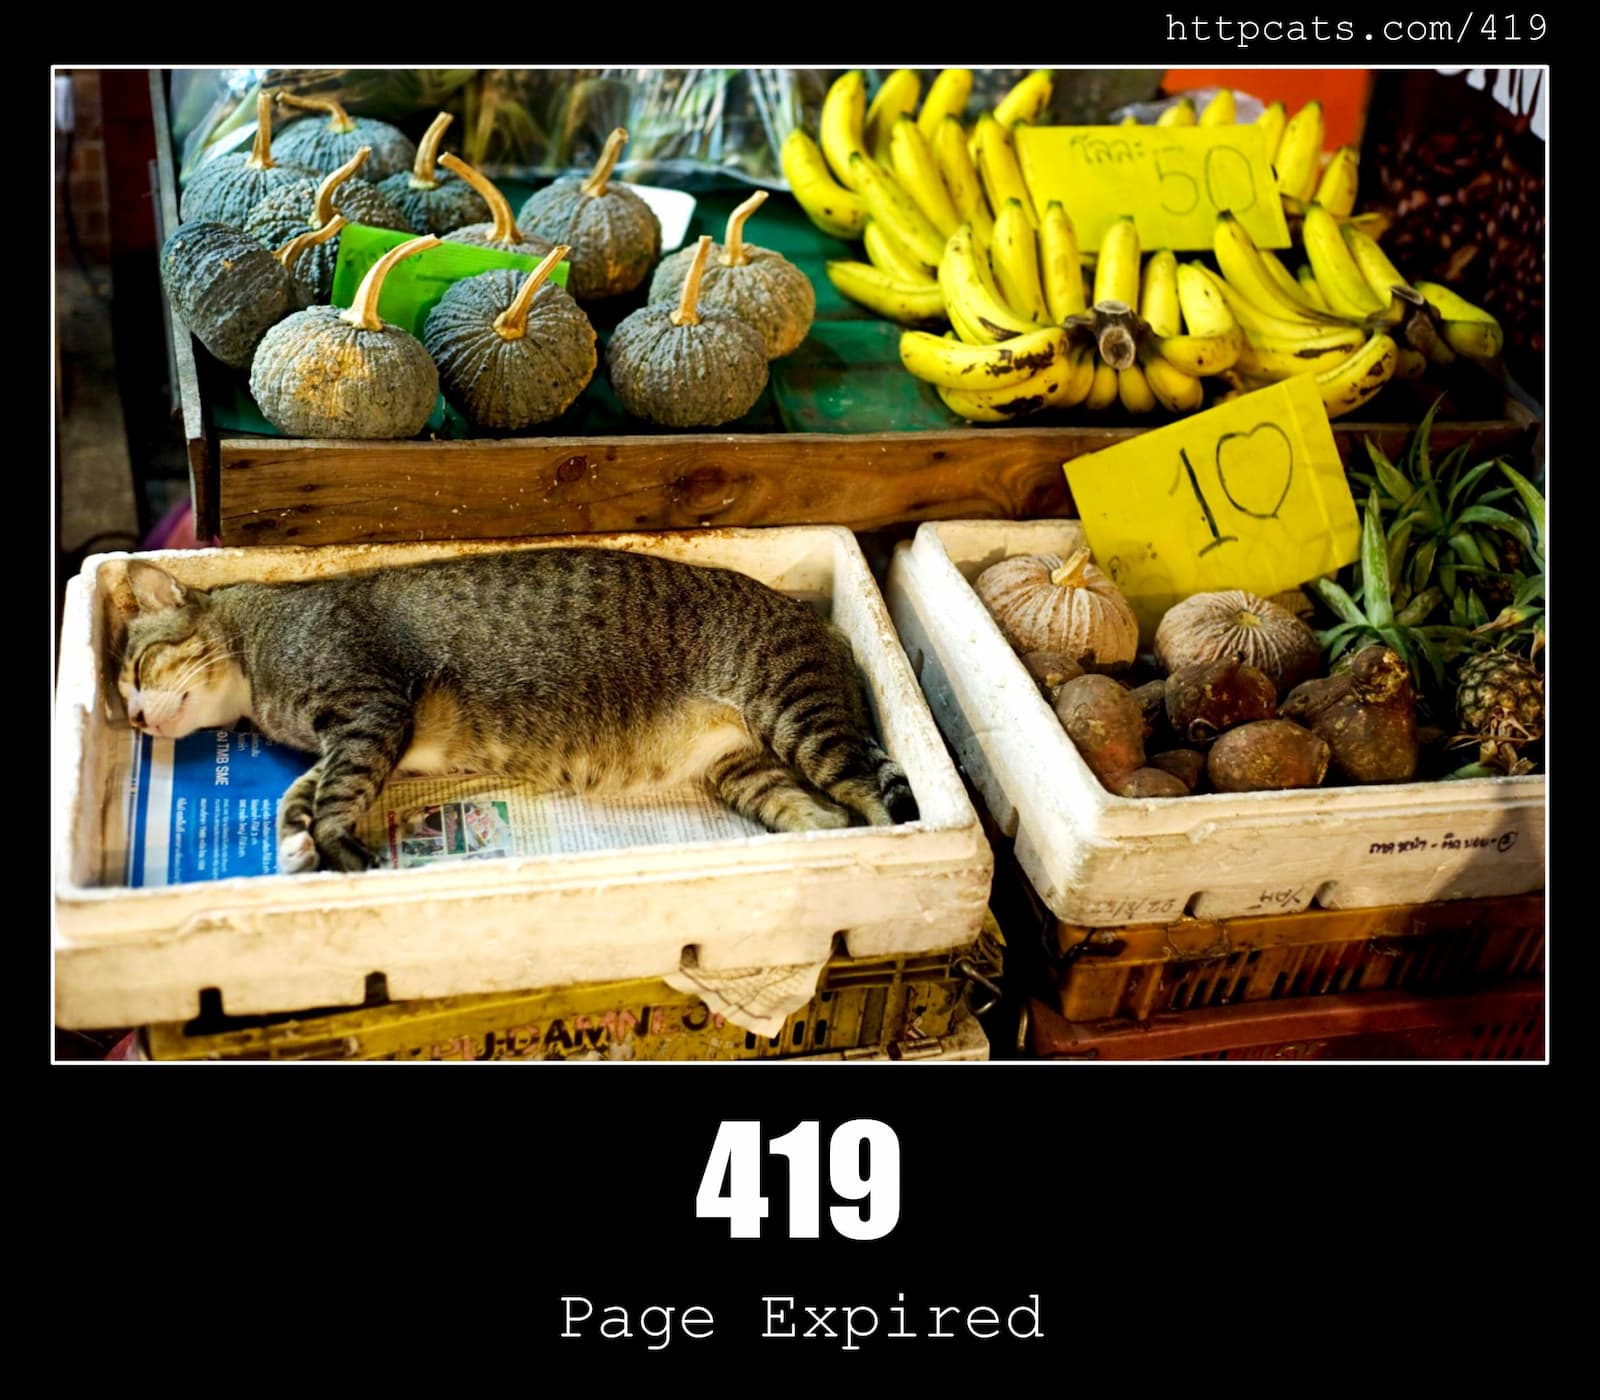 HTTP Status Code 419 Page Expired & Cats